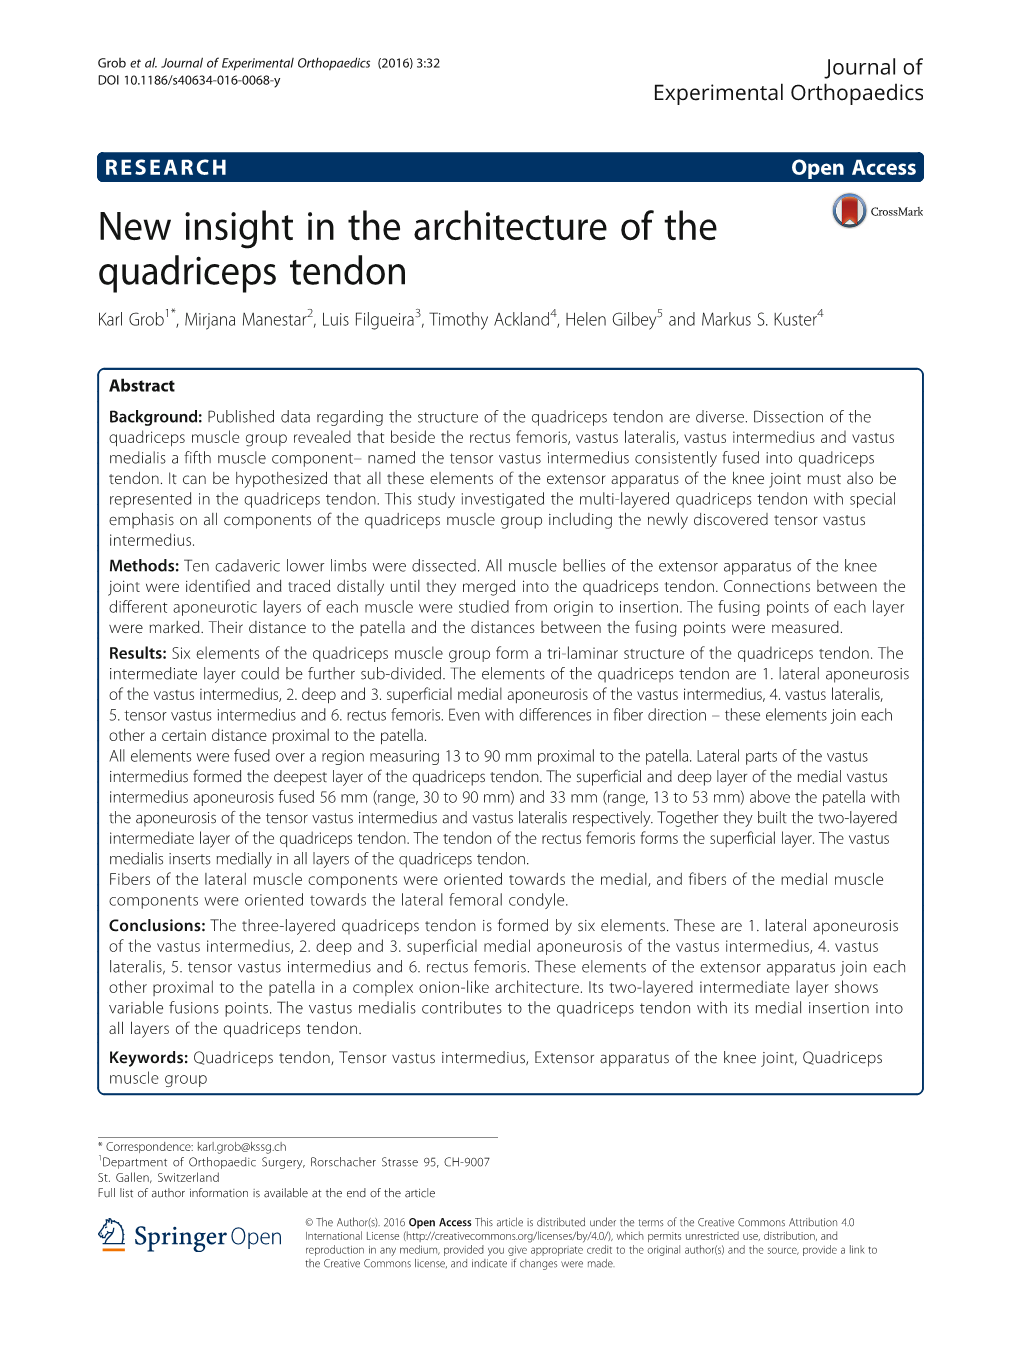 New Insight in the Architecture of the Quadriceps Tendon Karl Grob1*, Mirjana Manestar2, Luis Filgueira3, Timothy Ackland4, Helen Gilbey5 and Markus S